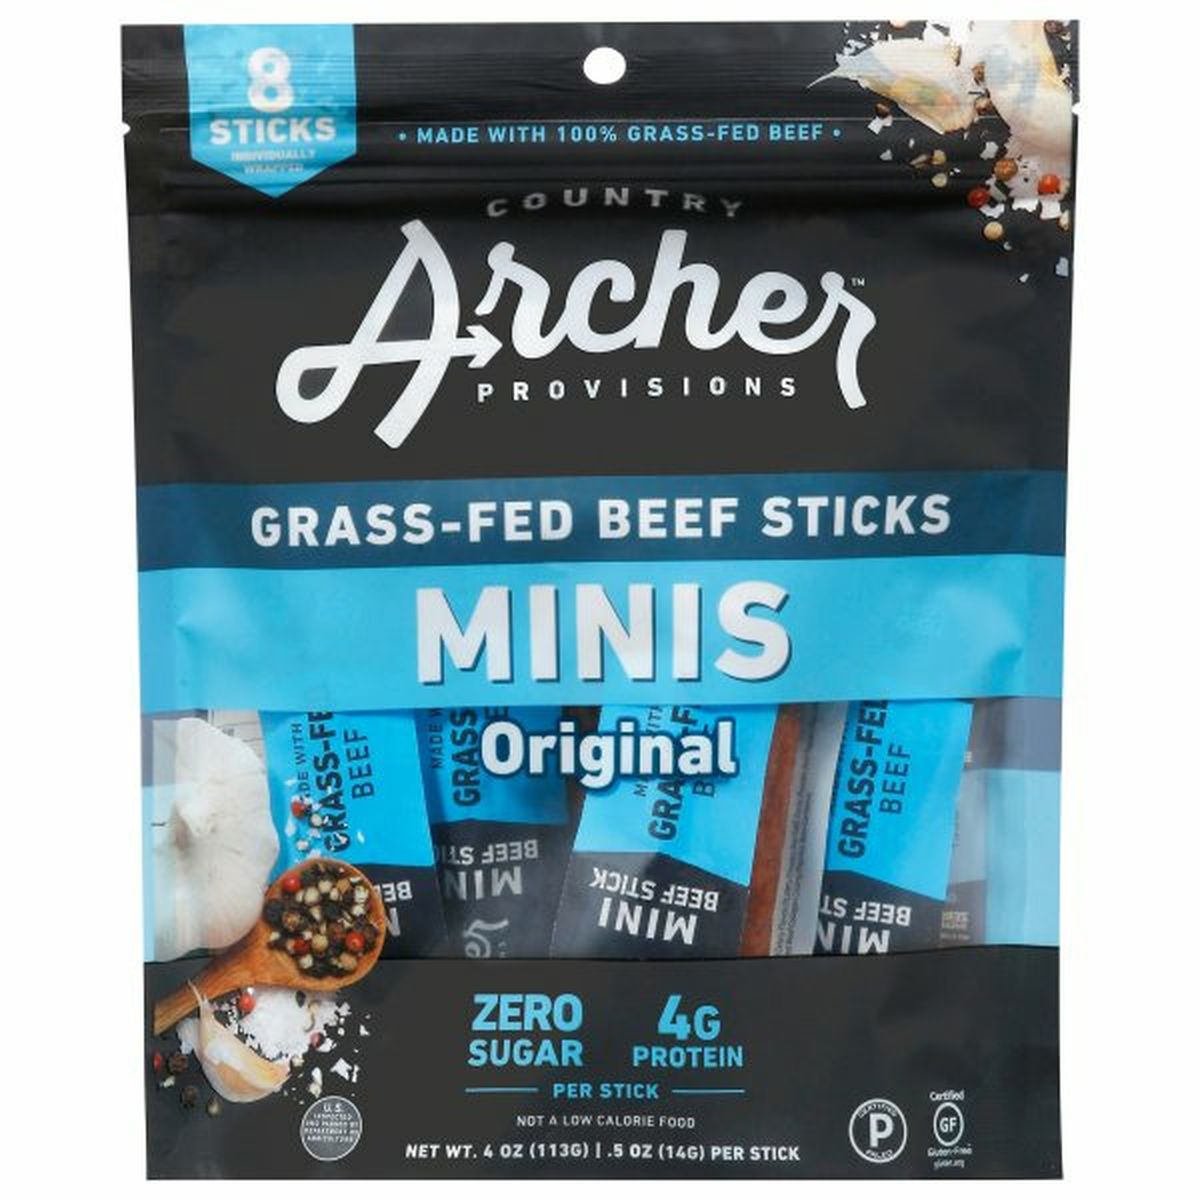 Calories in Country Archer Beef Sticks, Grass-Fed, Original, Minis